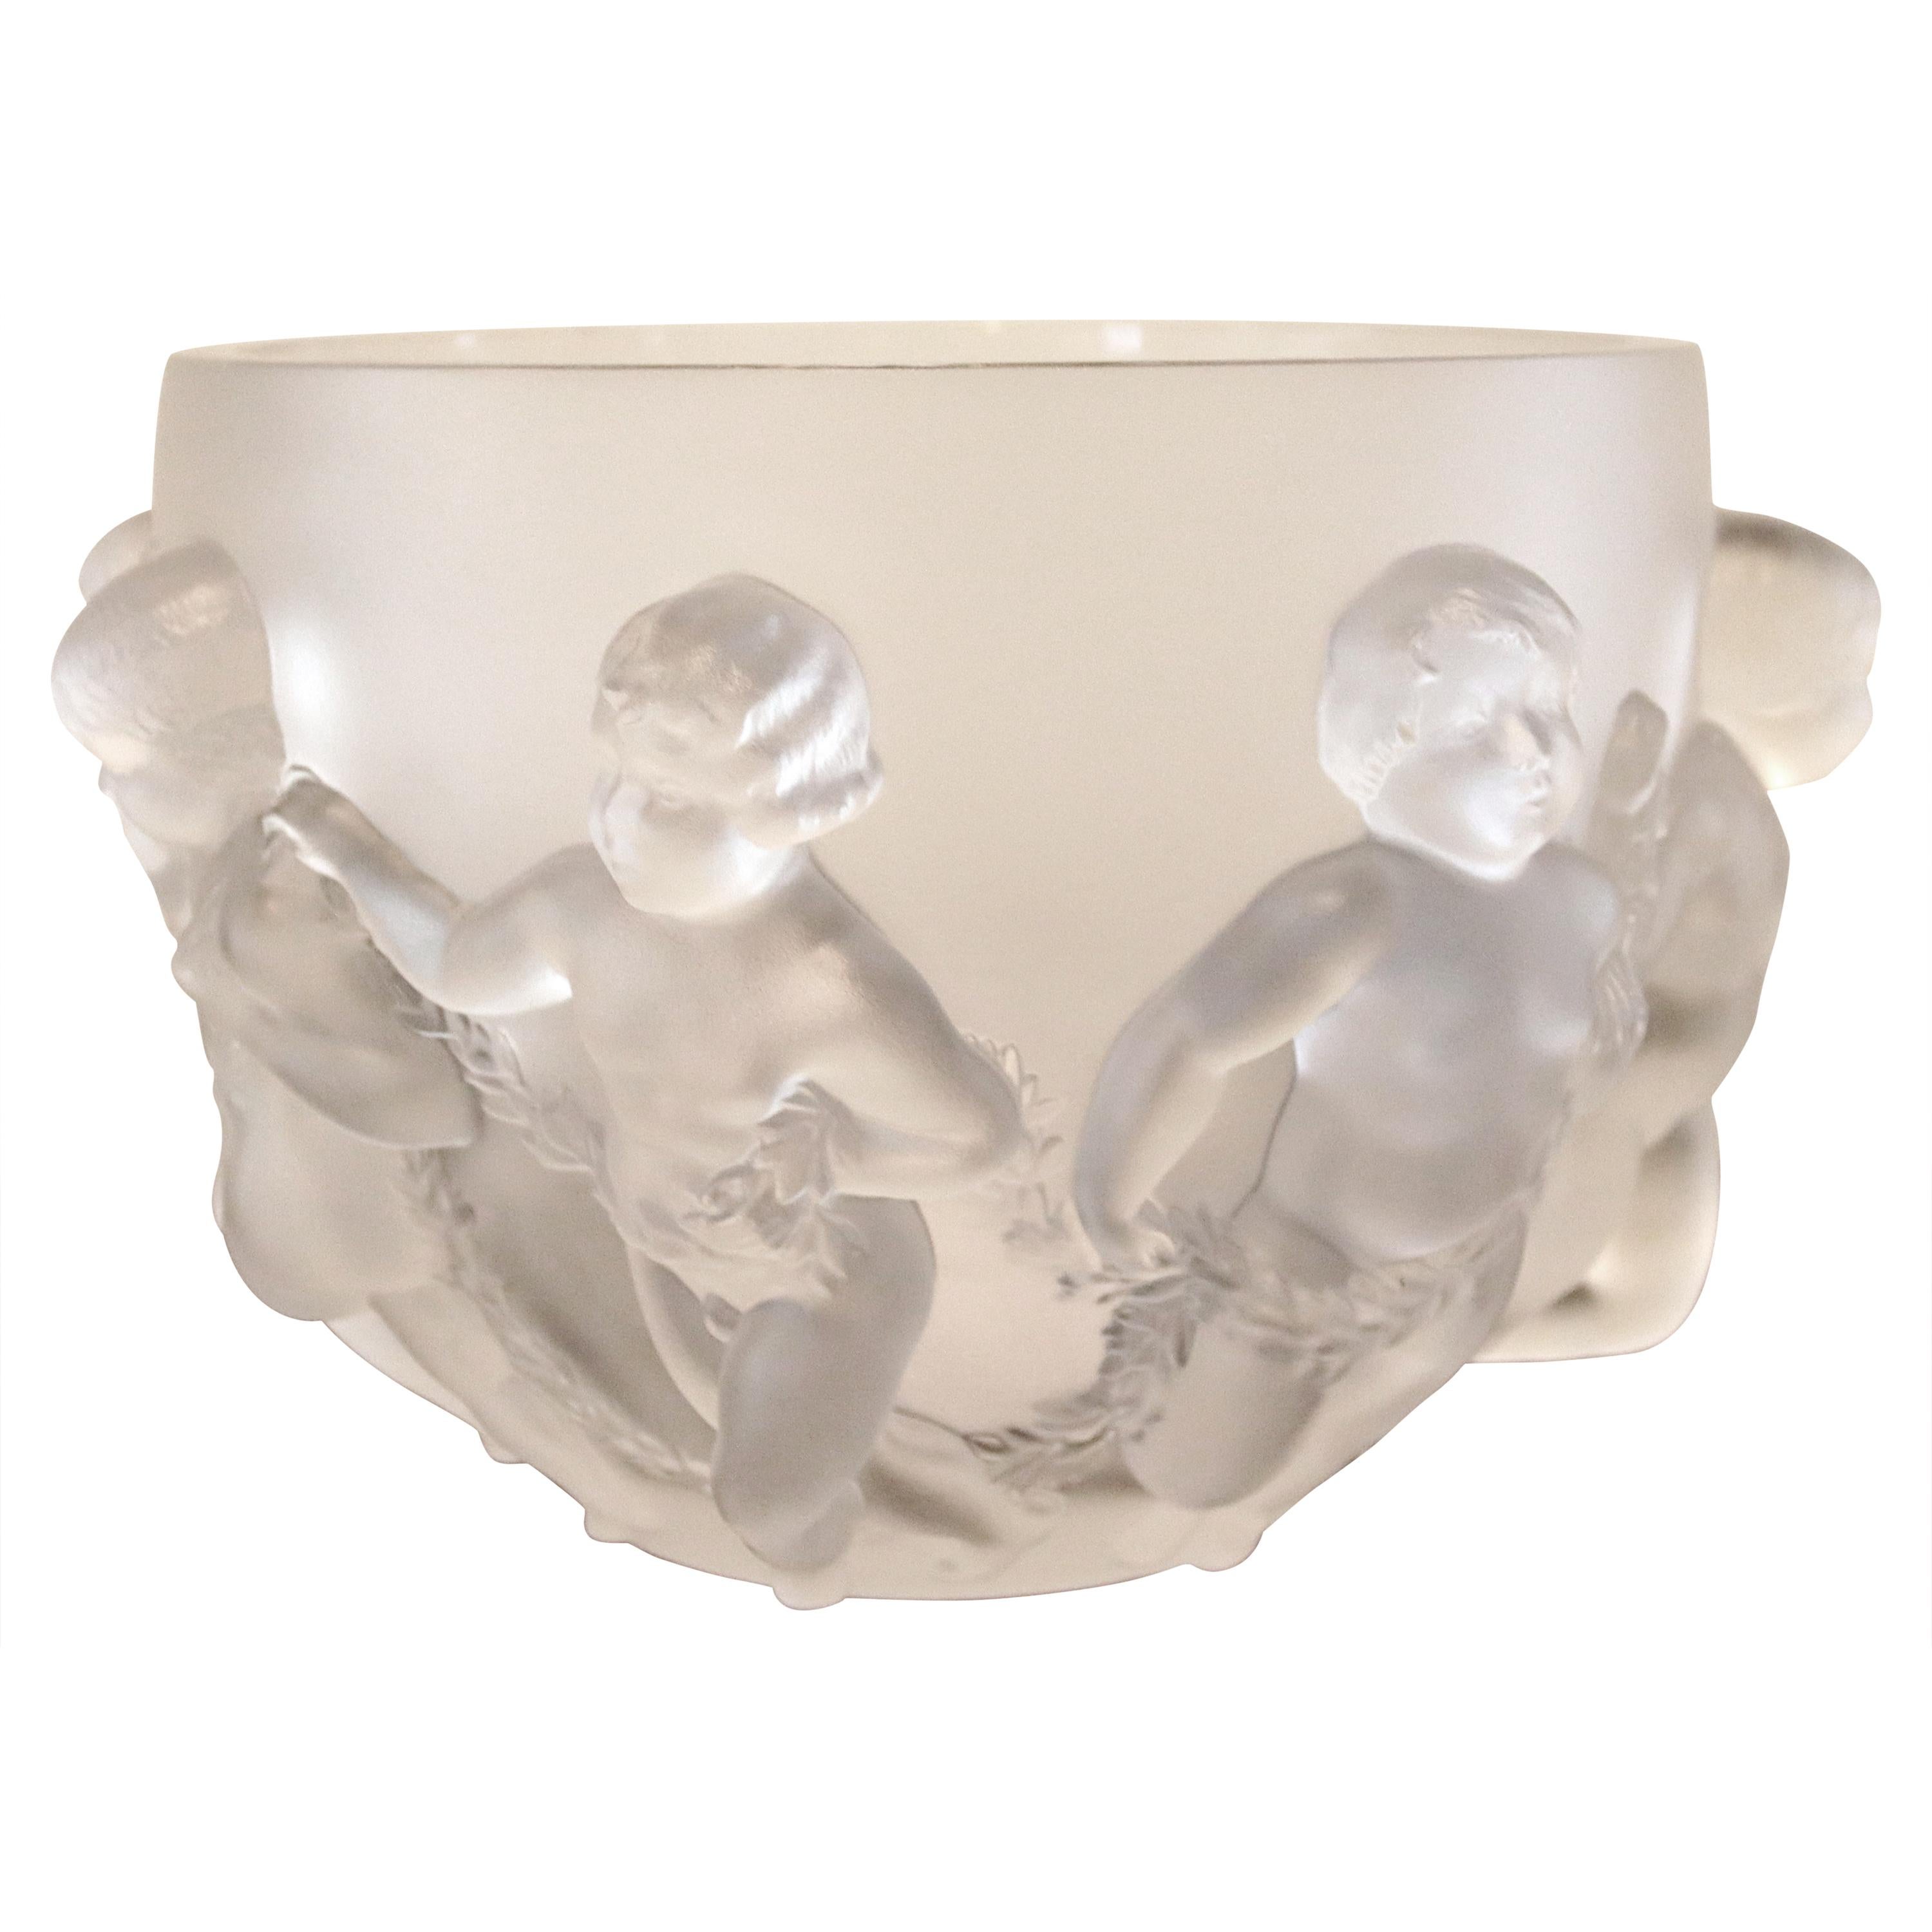 Lalique France Signed Crystal Glass Bowl Luxemburg Greco Roman Children Figure